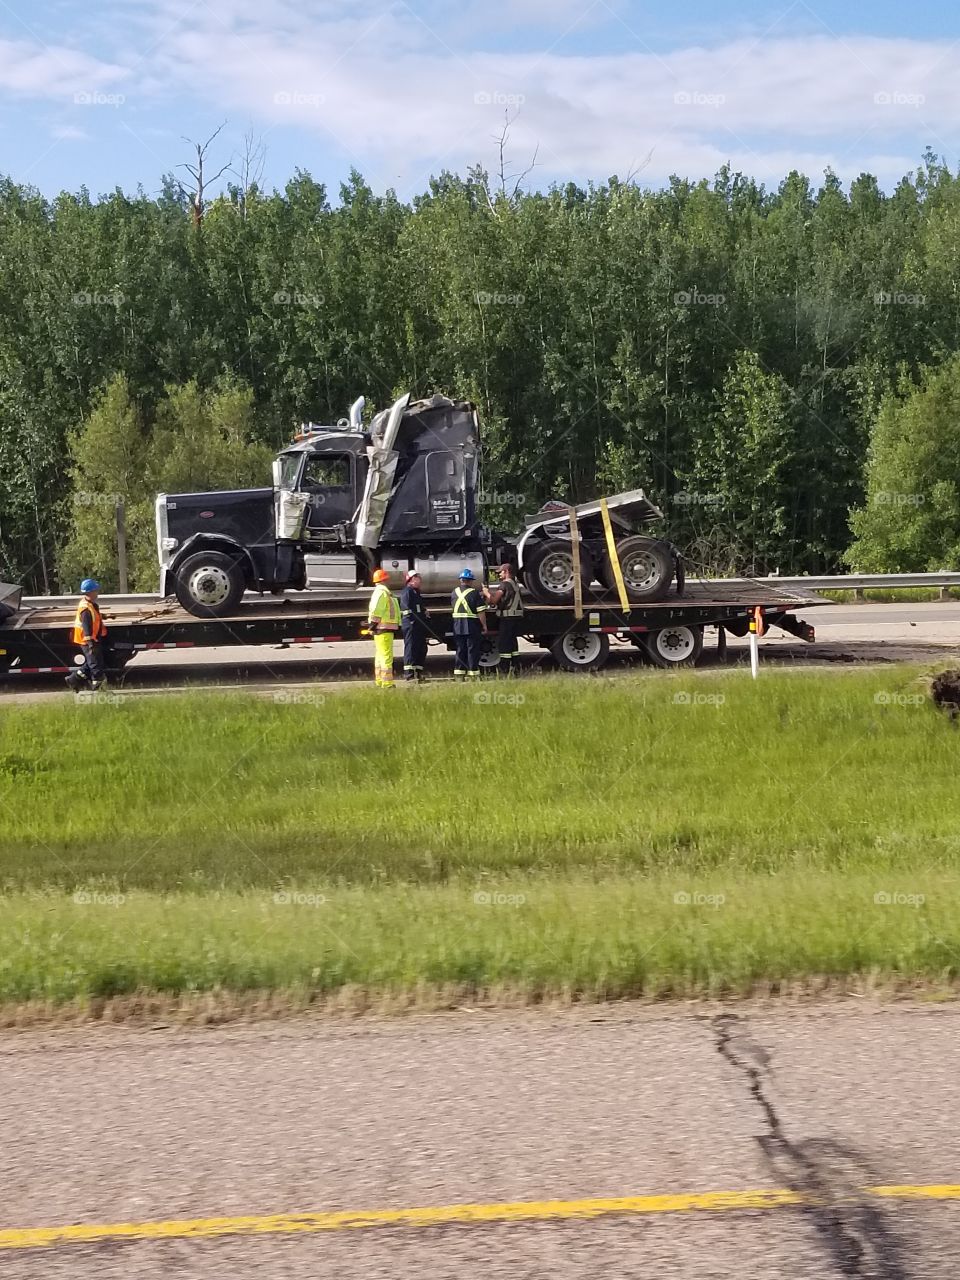 Highway tractor rolled over its load of wood on the highway. The semi truck was loaded onto a flat deck trailer and hauled away.